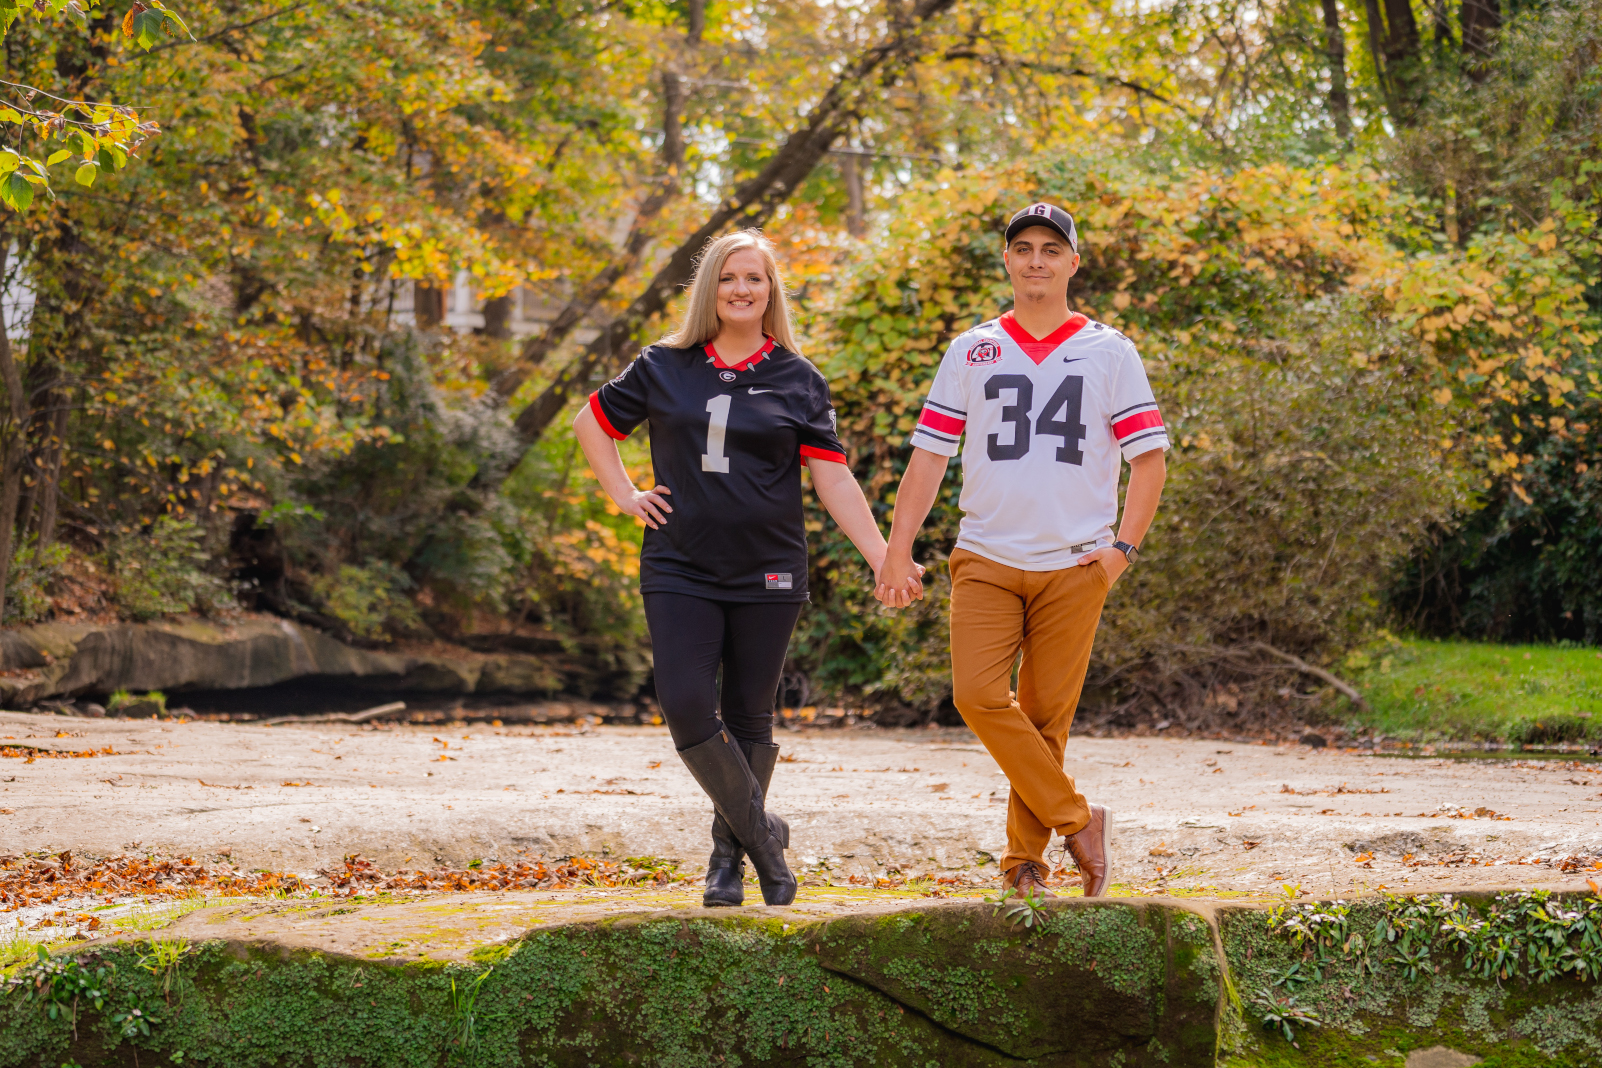 Man and woman fiancee engagement photo, couple portrait, smile, holding hands, nature, fall leaves, fall colors, outdoor fall engagement photo session at Grand Pacific Junction Historic Shopping District